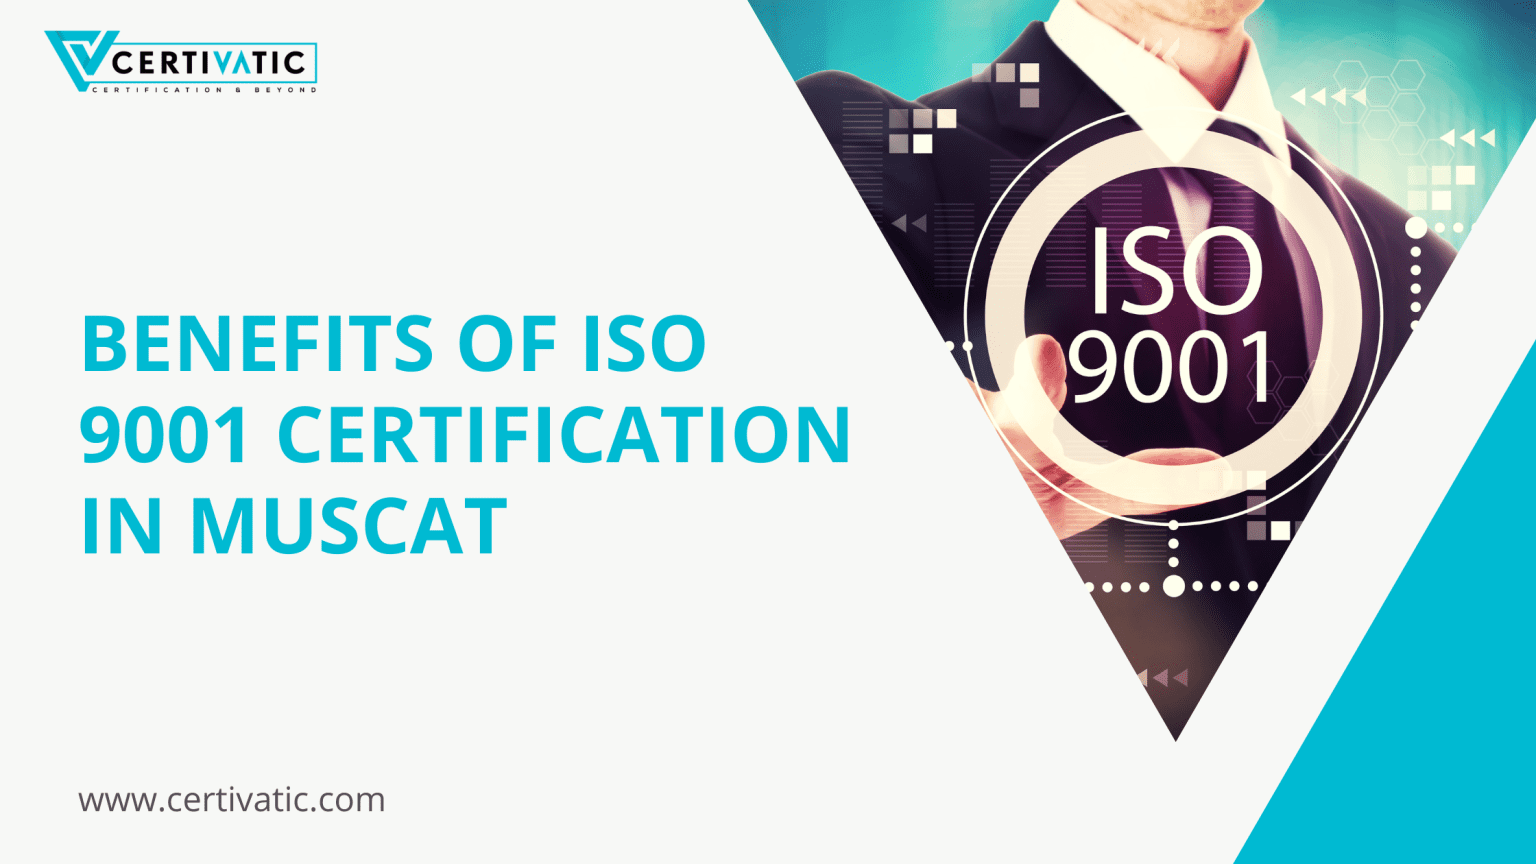 Benefits of ISO 9001 Certification in Muscat